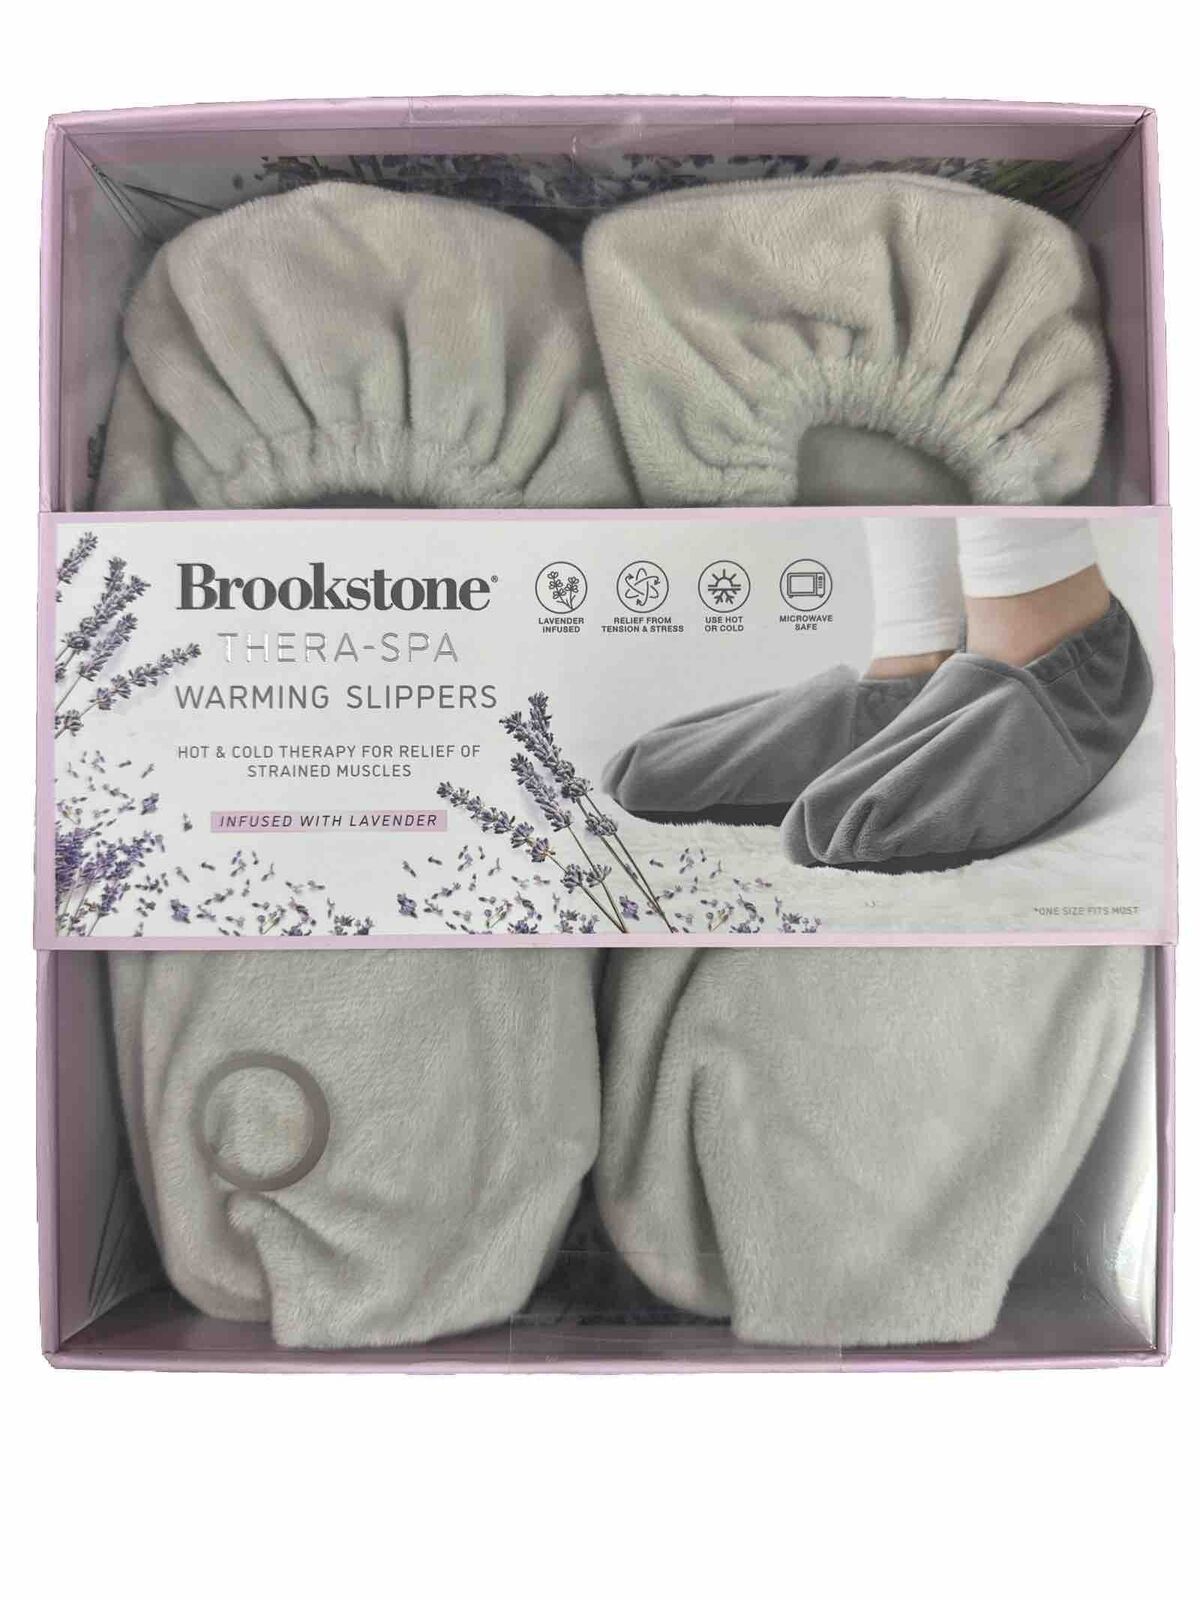 Brookstone Lavender Infused Thera-Spa Warming Slippers Hot & Cold Therapy